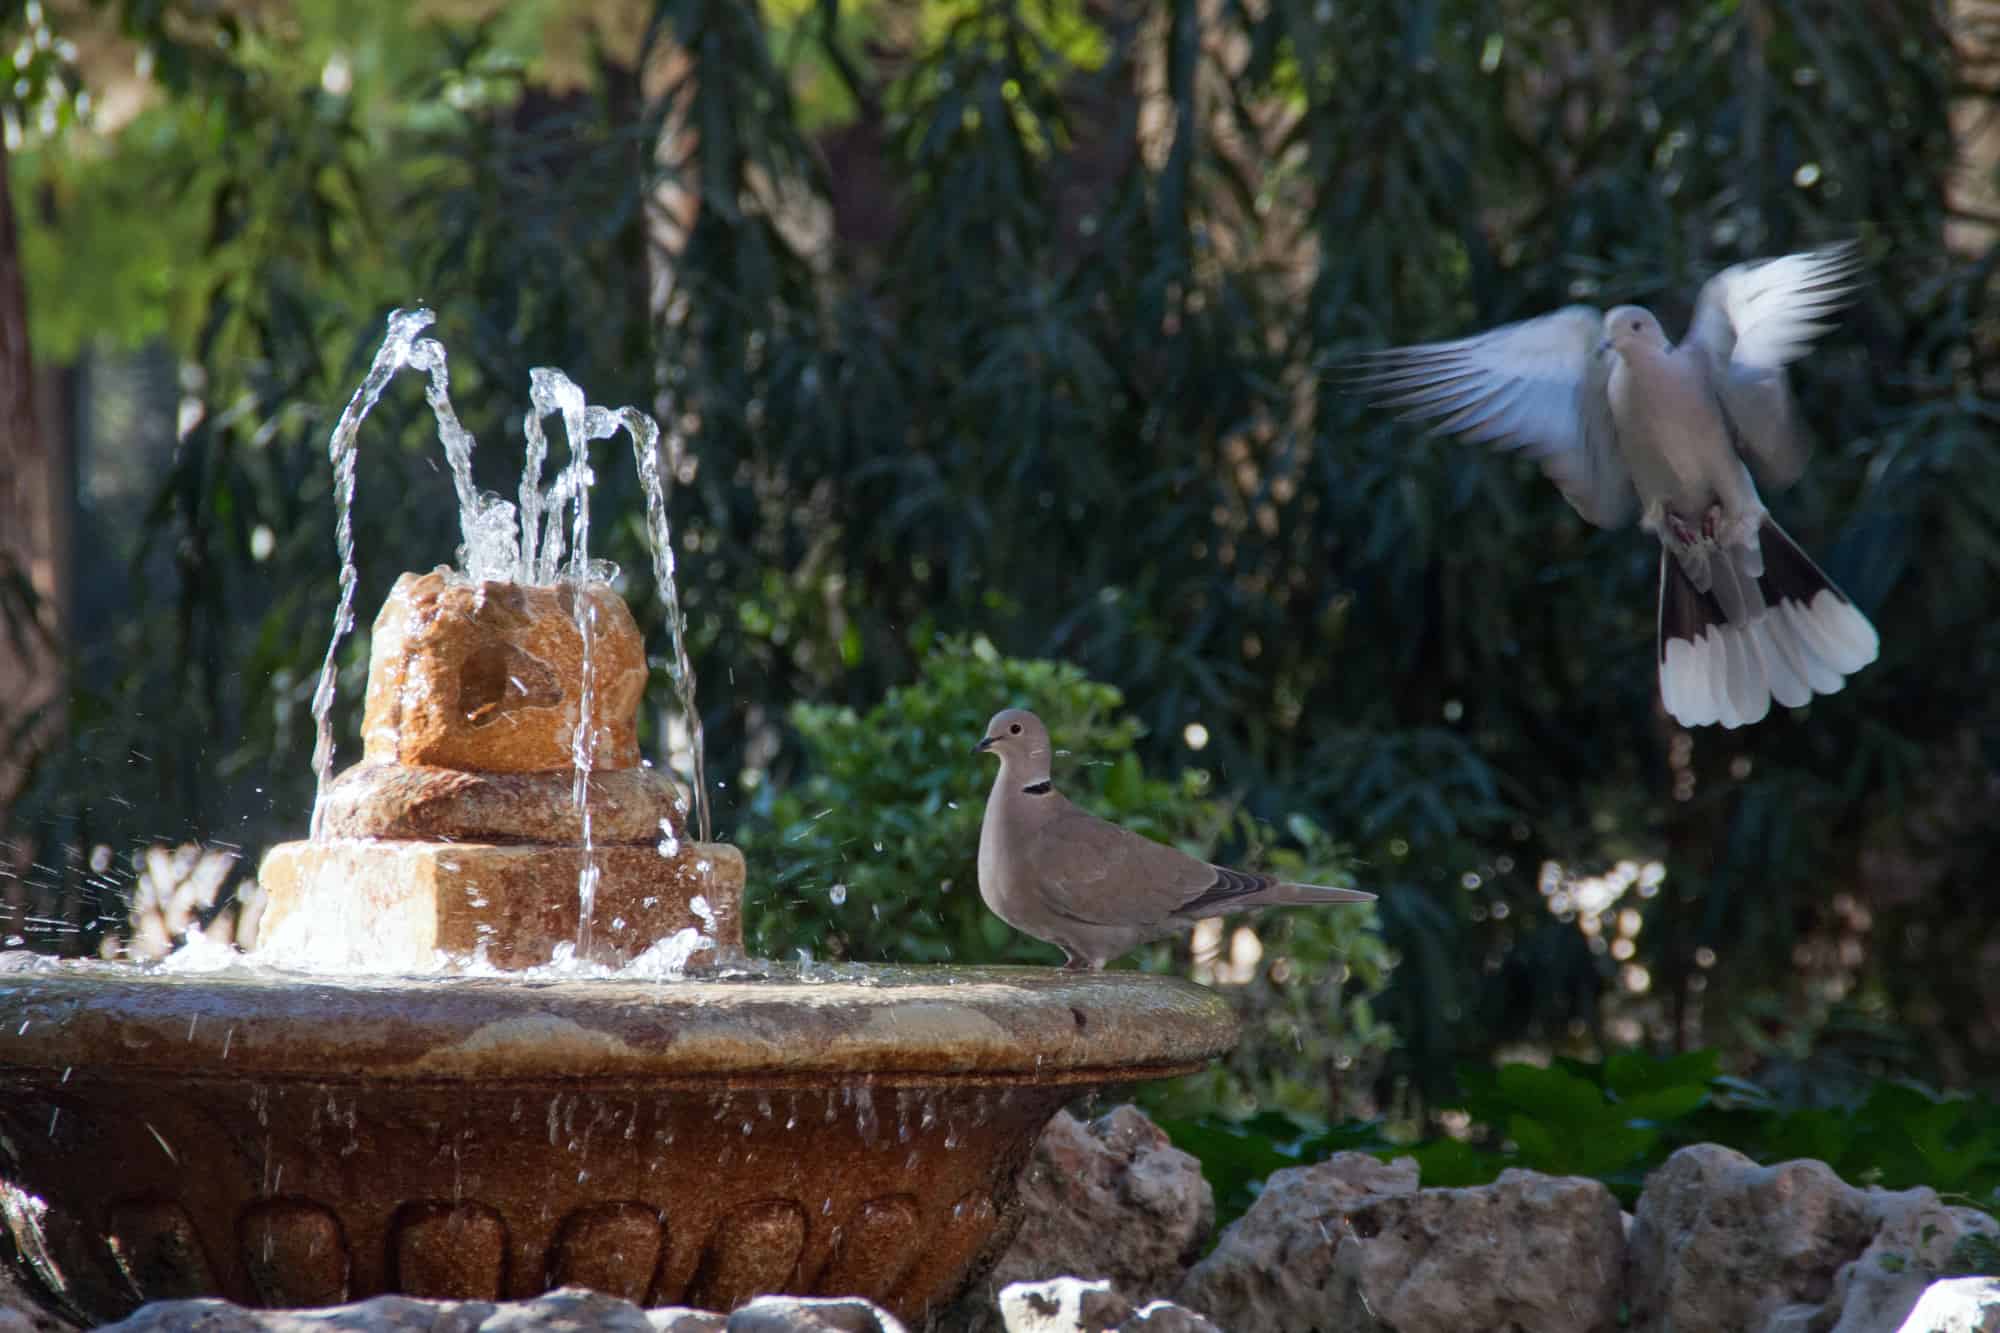 Landscaping mistakes that deter birds